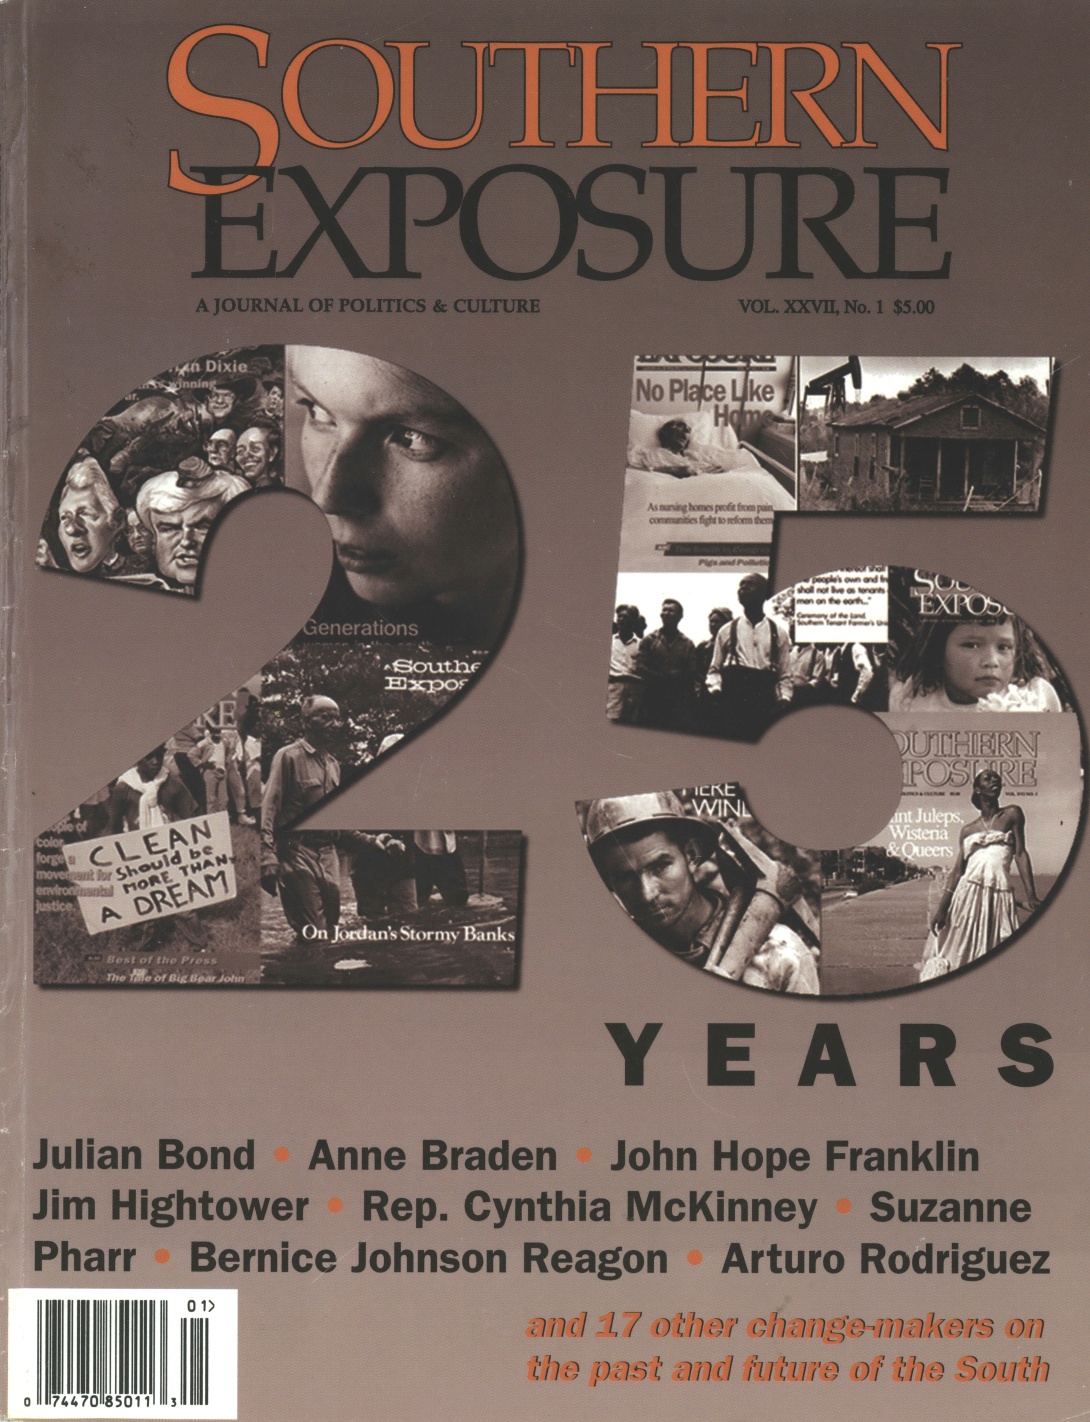 Magazine cover with large number 25 inset with photos on the front cover, against brown background. Text reads "25 Years"